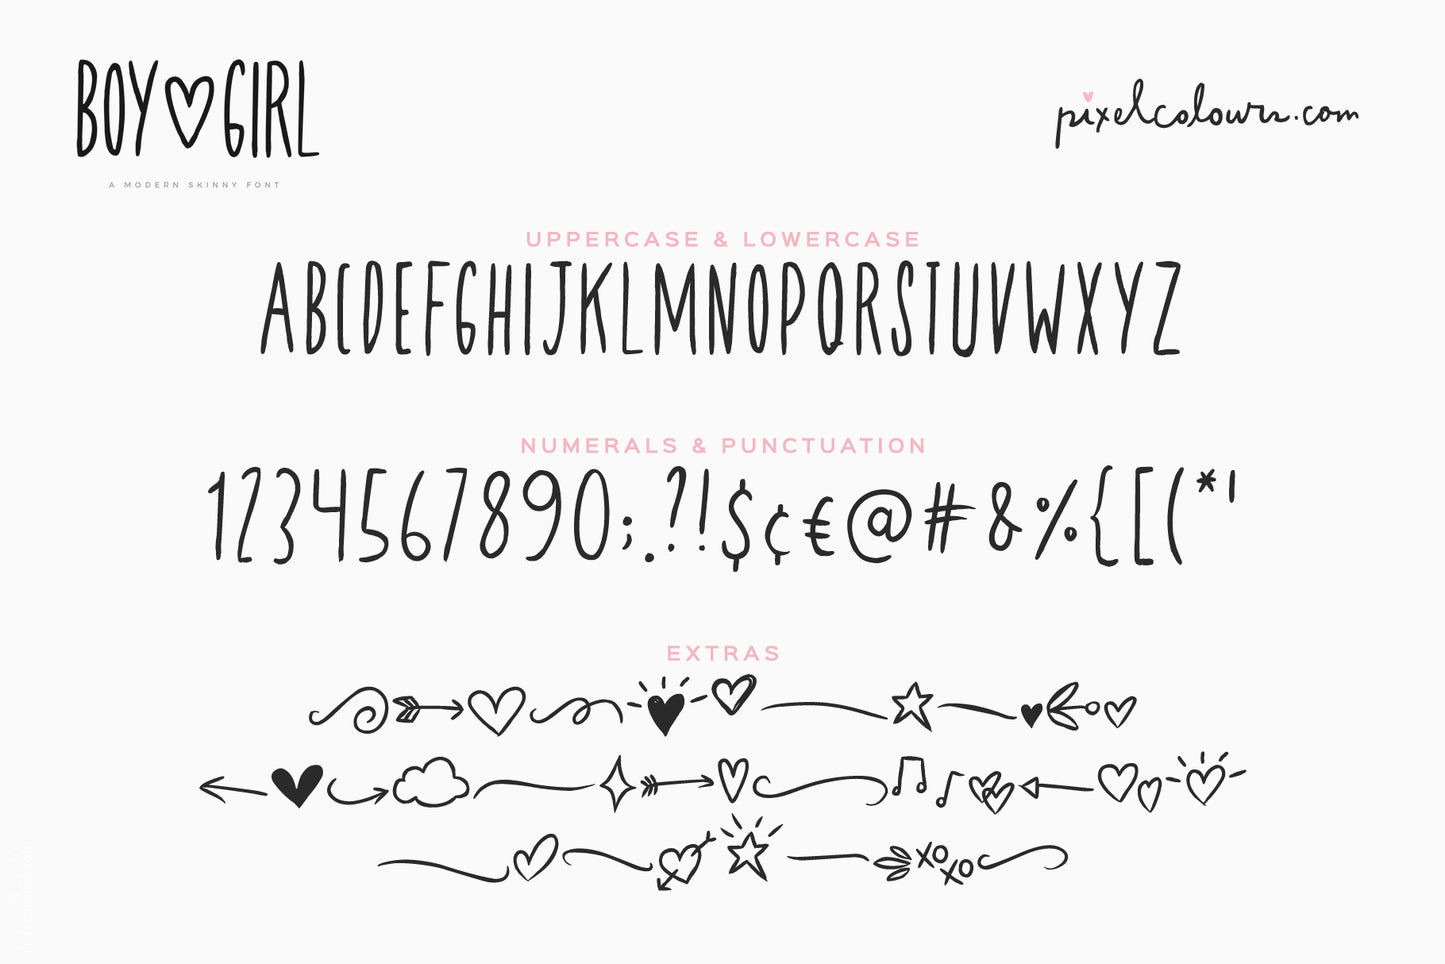 Boy and Girl Skinny Font